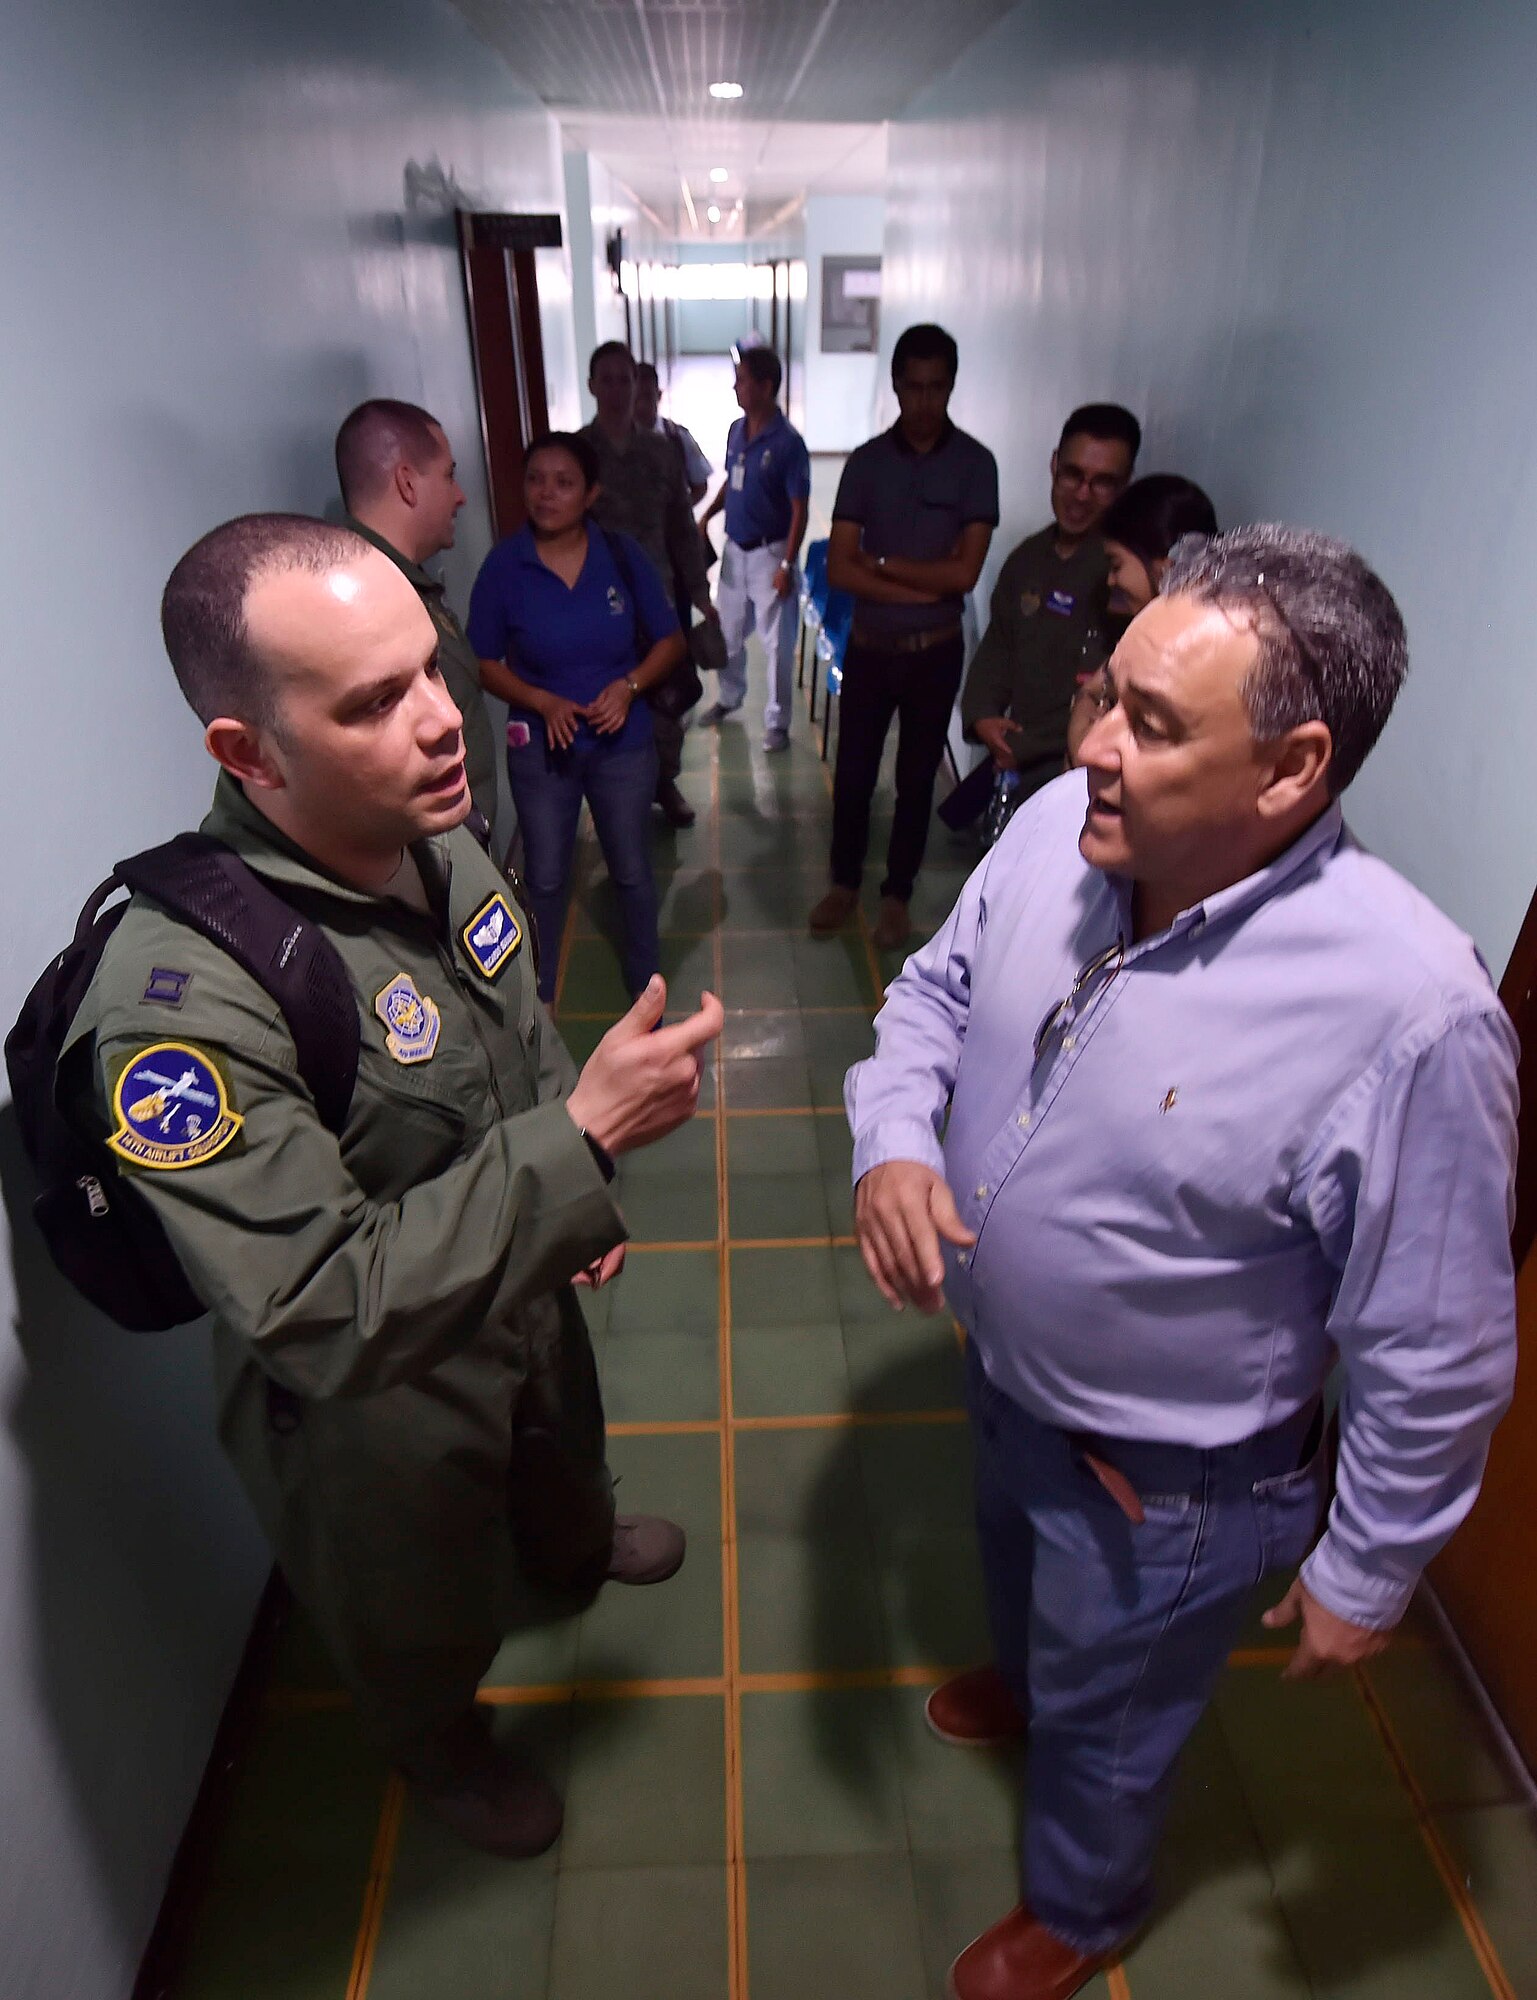 U.S. Air Force Capt. Ricardo Sequeira, 628th Medical Operations Support Squadron and 14th Airlift Squadron flight surgeon, Joint Base Charleston, South Carolina, talks about aerospace medicine best practices with Dr. Jose Alejandro Servellon Duran, Fuerza Aerea de Honduras Comandancia General aerospace medicine, as part of a subject matter expert exchange in Tegucigalpa, Honduras, April 4. The global health engagement brought U.S. and Honduran counterparts together to build and strengthen partner relationships.